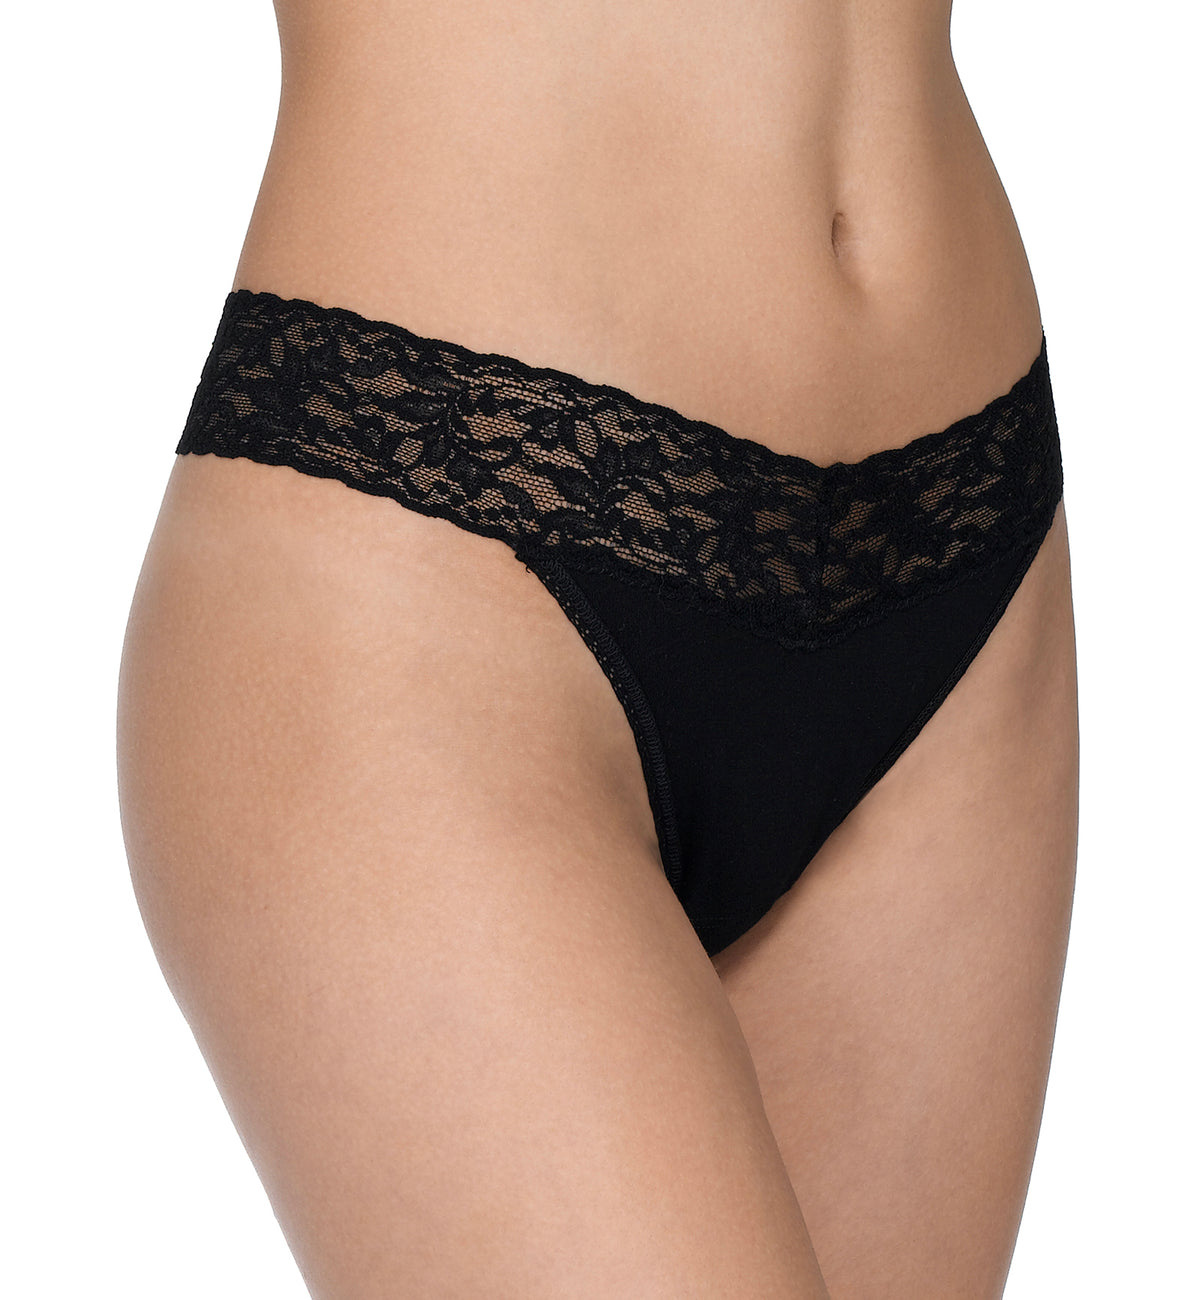 Hanky Panky Original Rise Organic Cotton Thong with Lace (891801),Black - Black,One Size